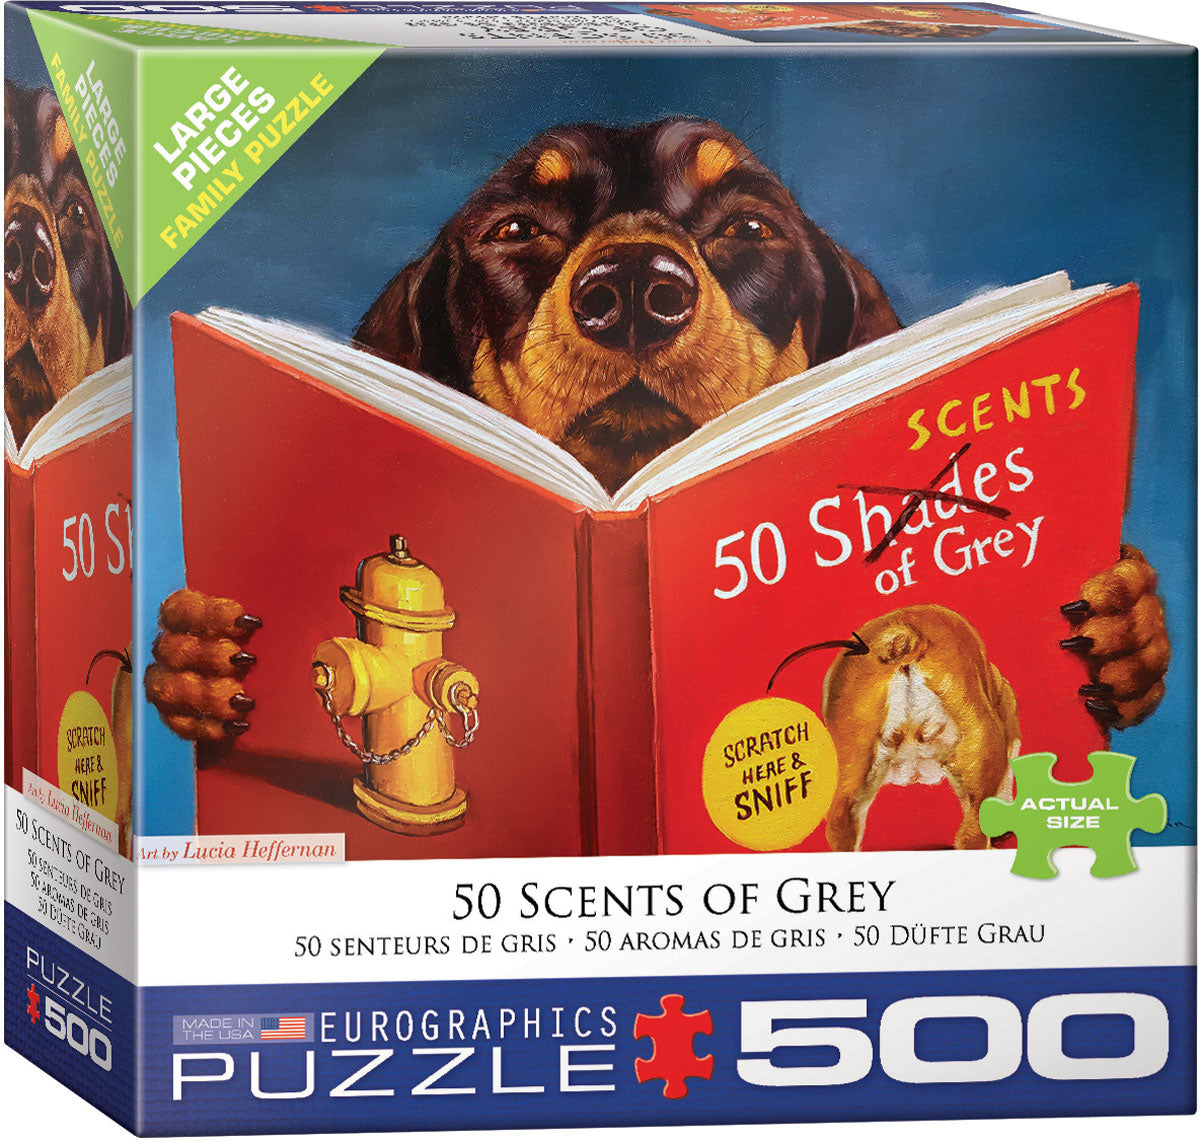 50 Scents of Grey